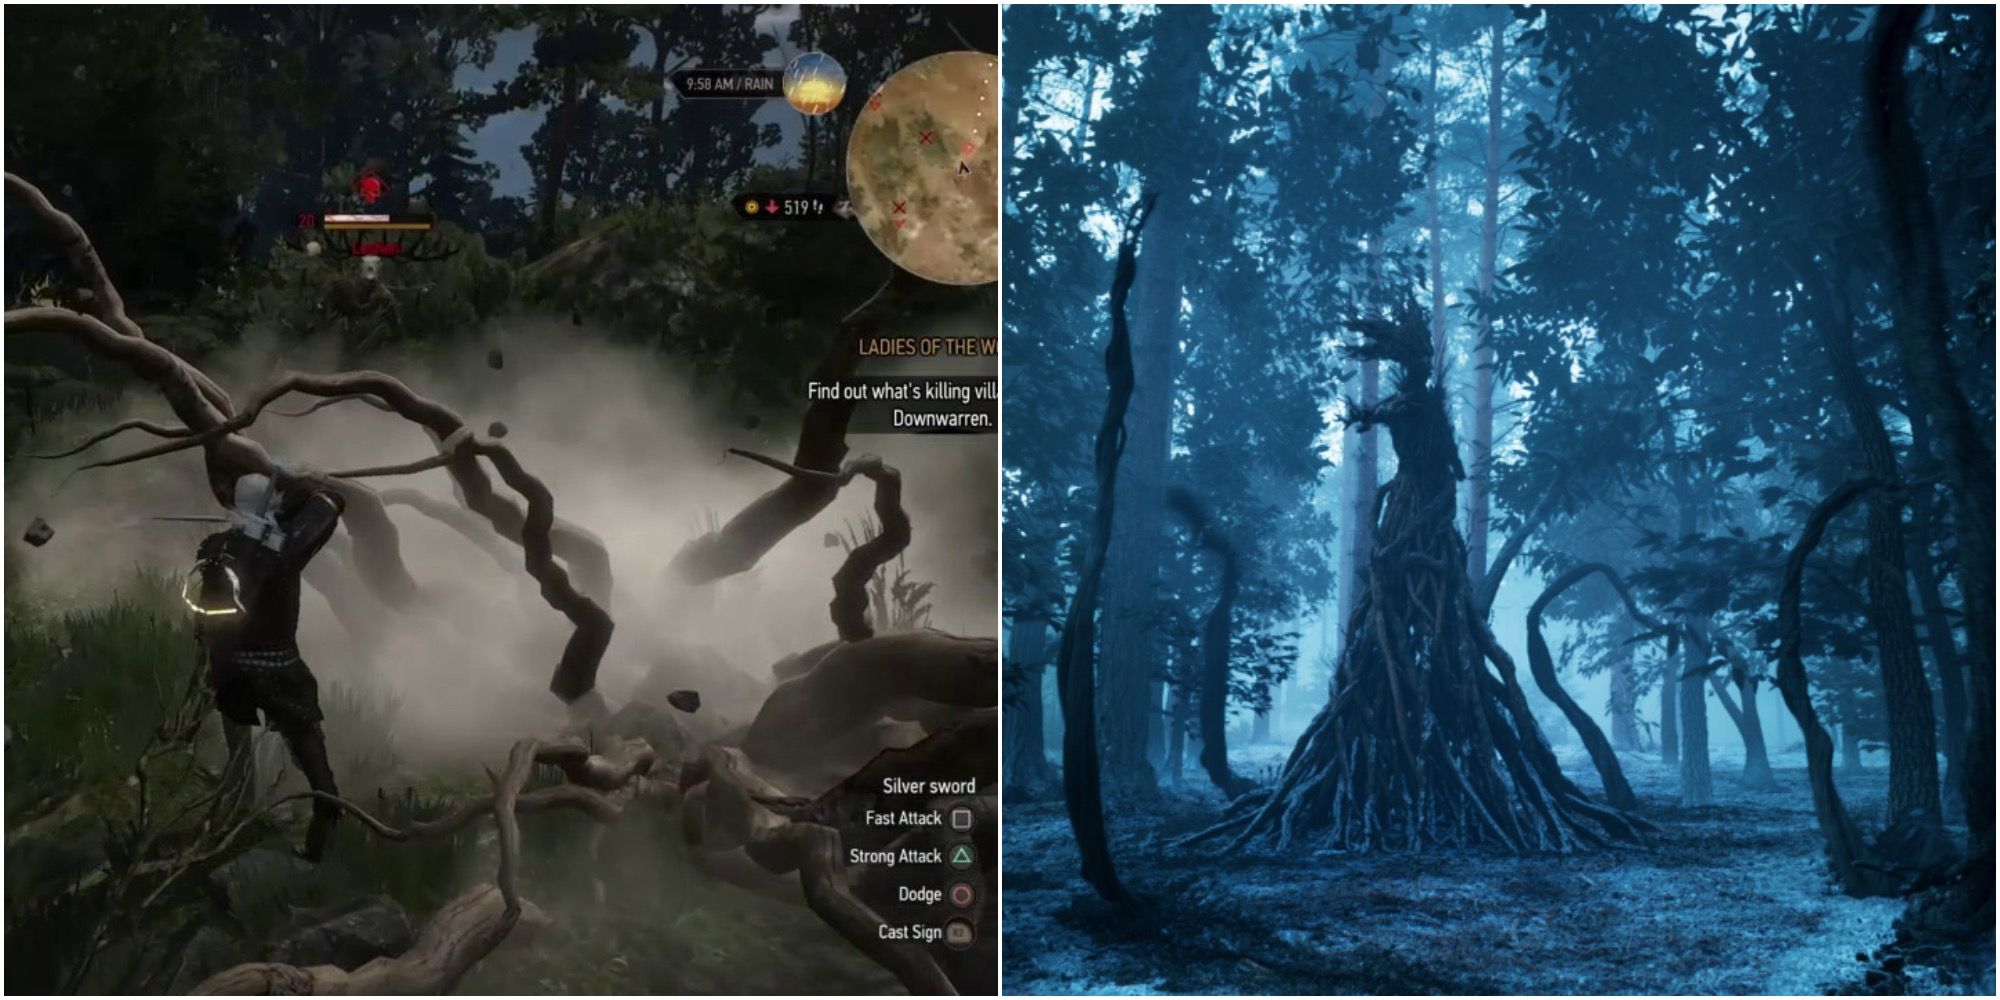 The Witcher's Leshy Attacks In The Witcher 3 And Netflix Series